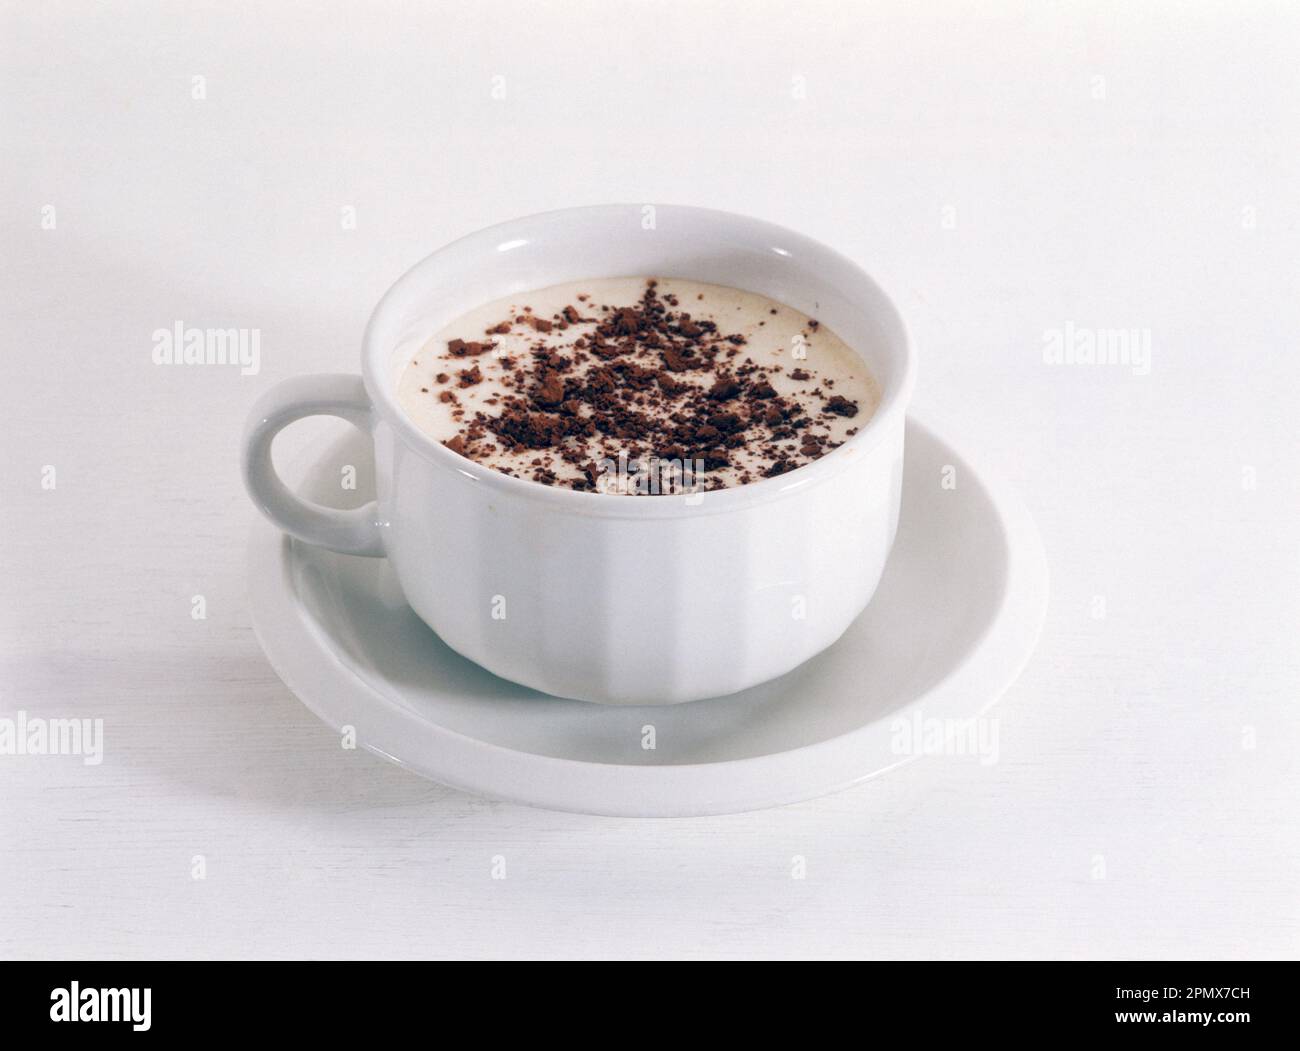 https://c8.alamy.com/comp/2PMX7CH/cappuccino-coffee-with-chocolate-sprinkles-in-white-cup-and-saucer-2PMX7CH.jpg